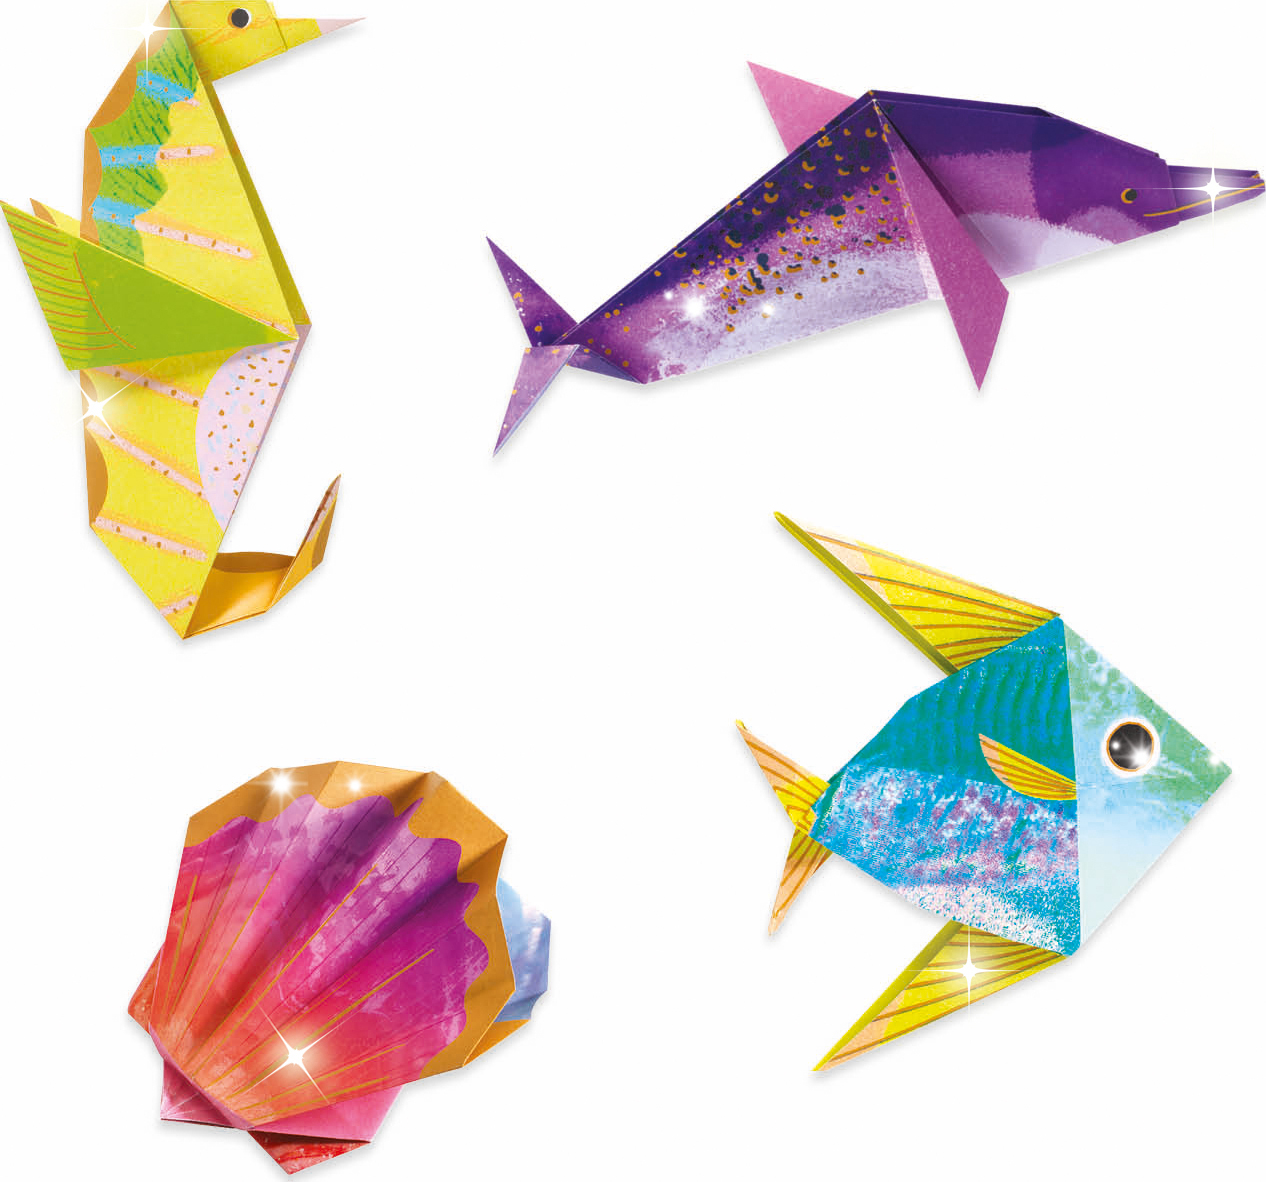 Shivers Origami Paper Craft Kit - Imagination Toys